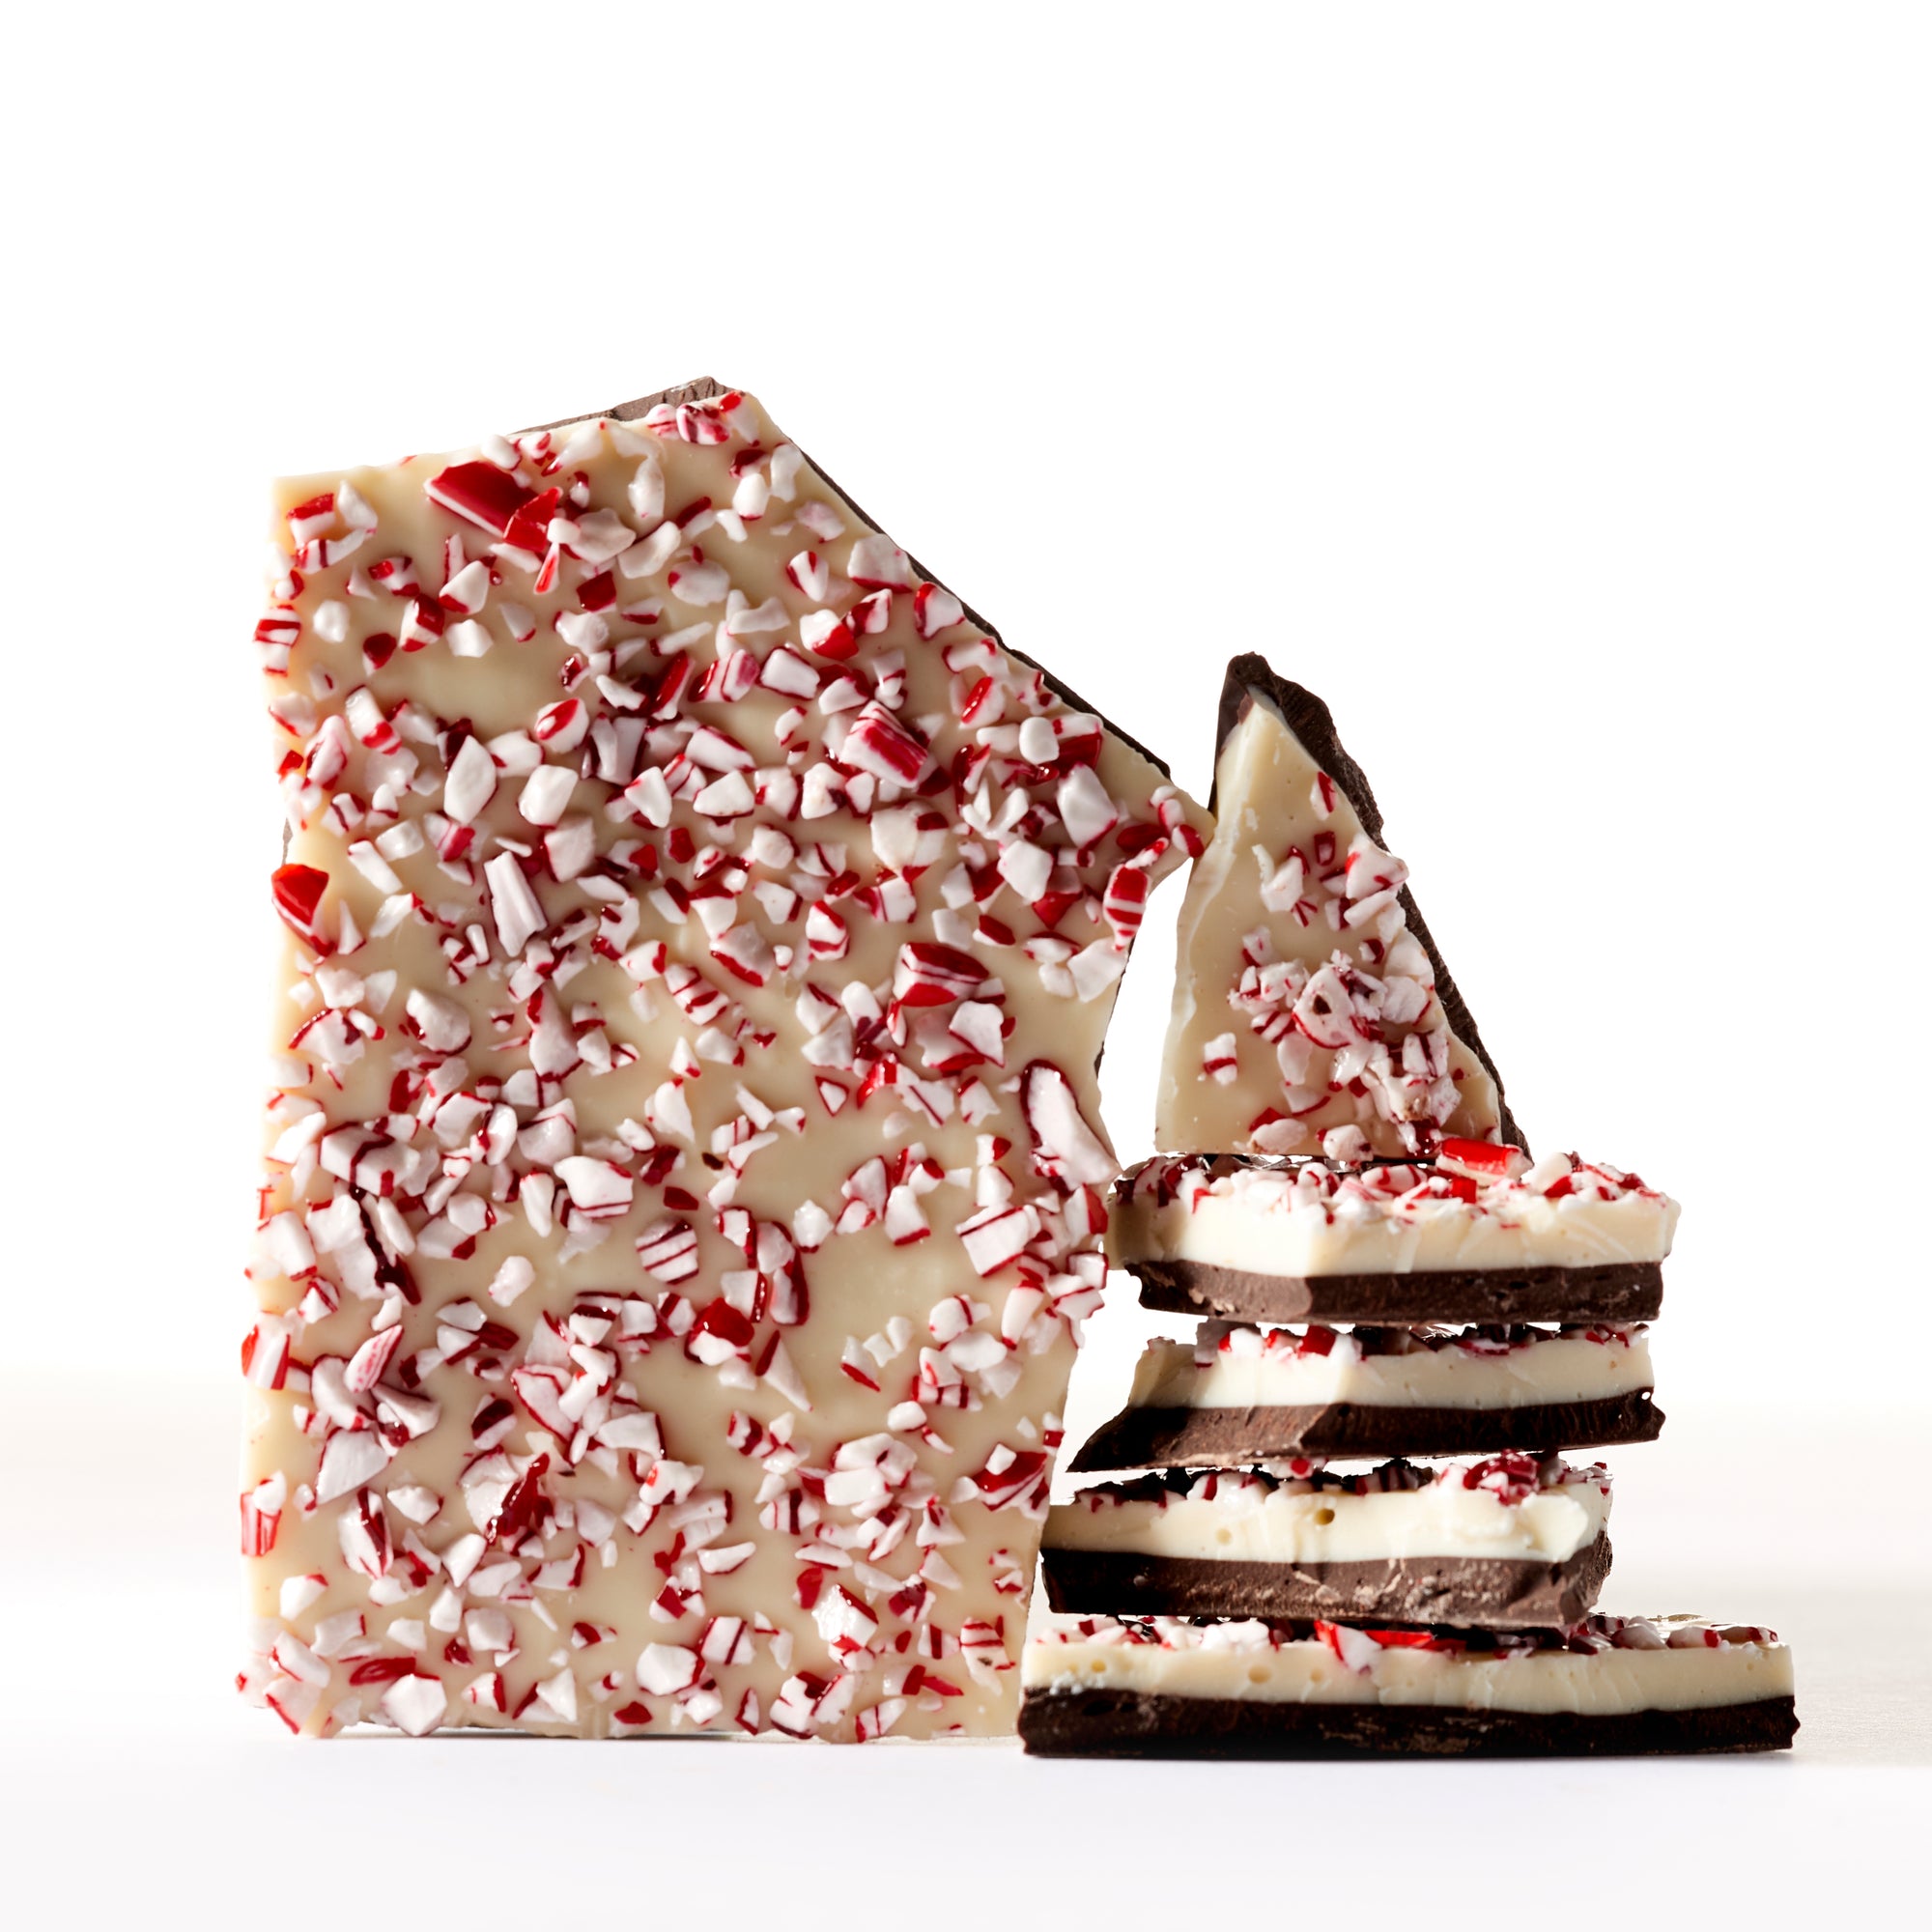 Assorted Dark &amp; White Chocolate Bark Wooden Table Baking Co.